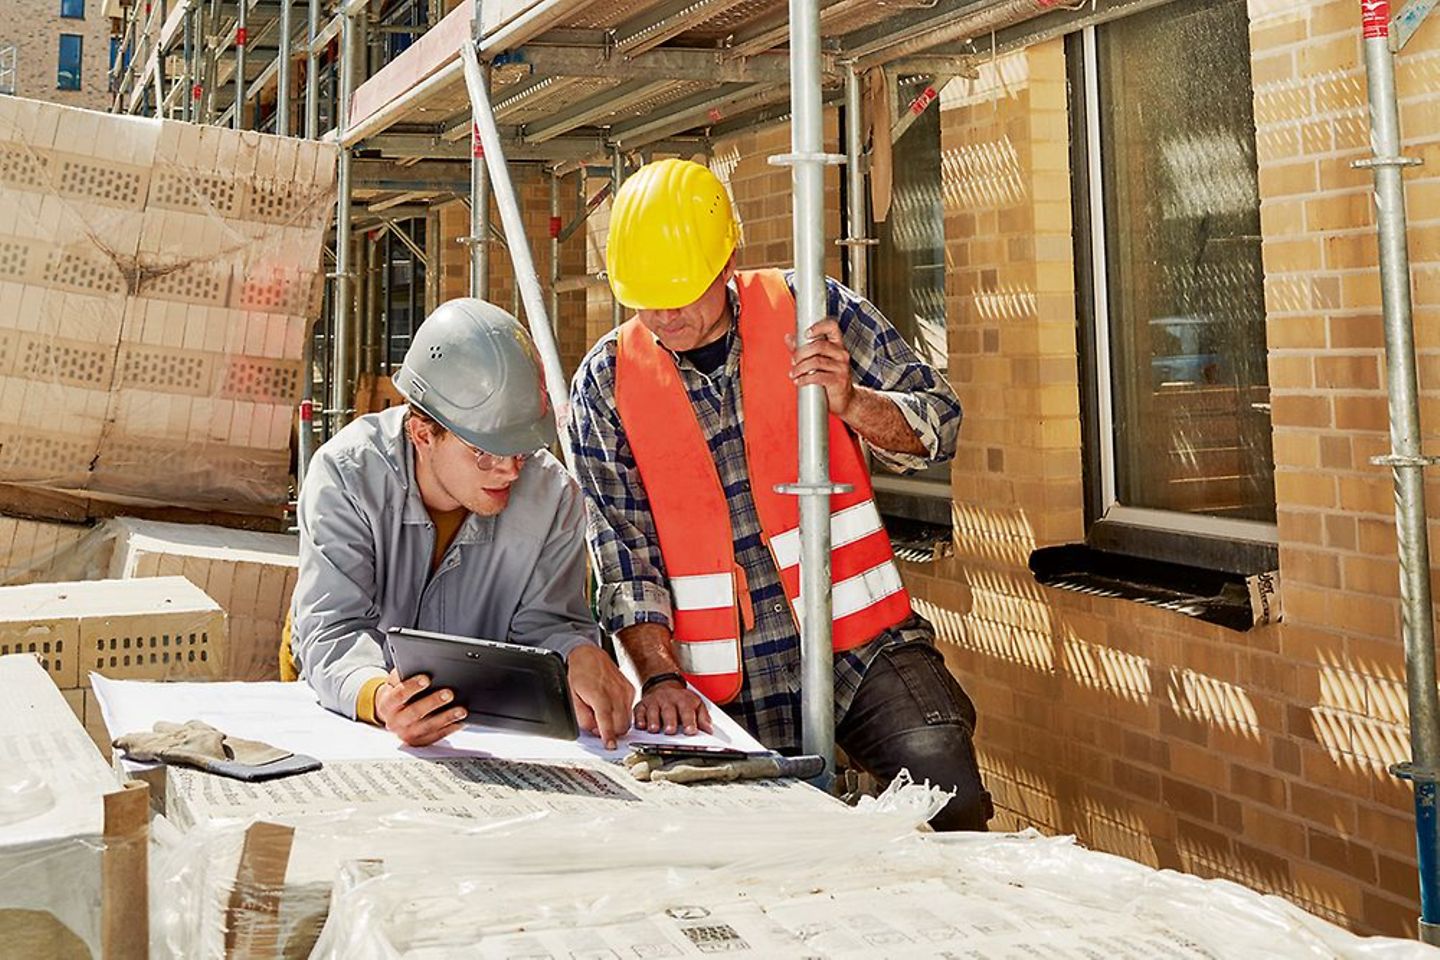 Two people look at planning documents on a construction site